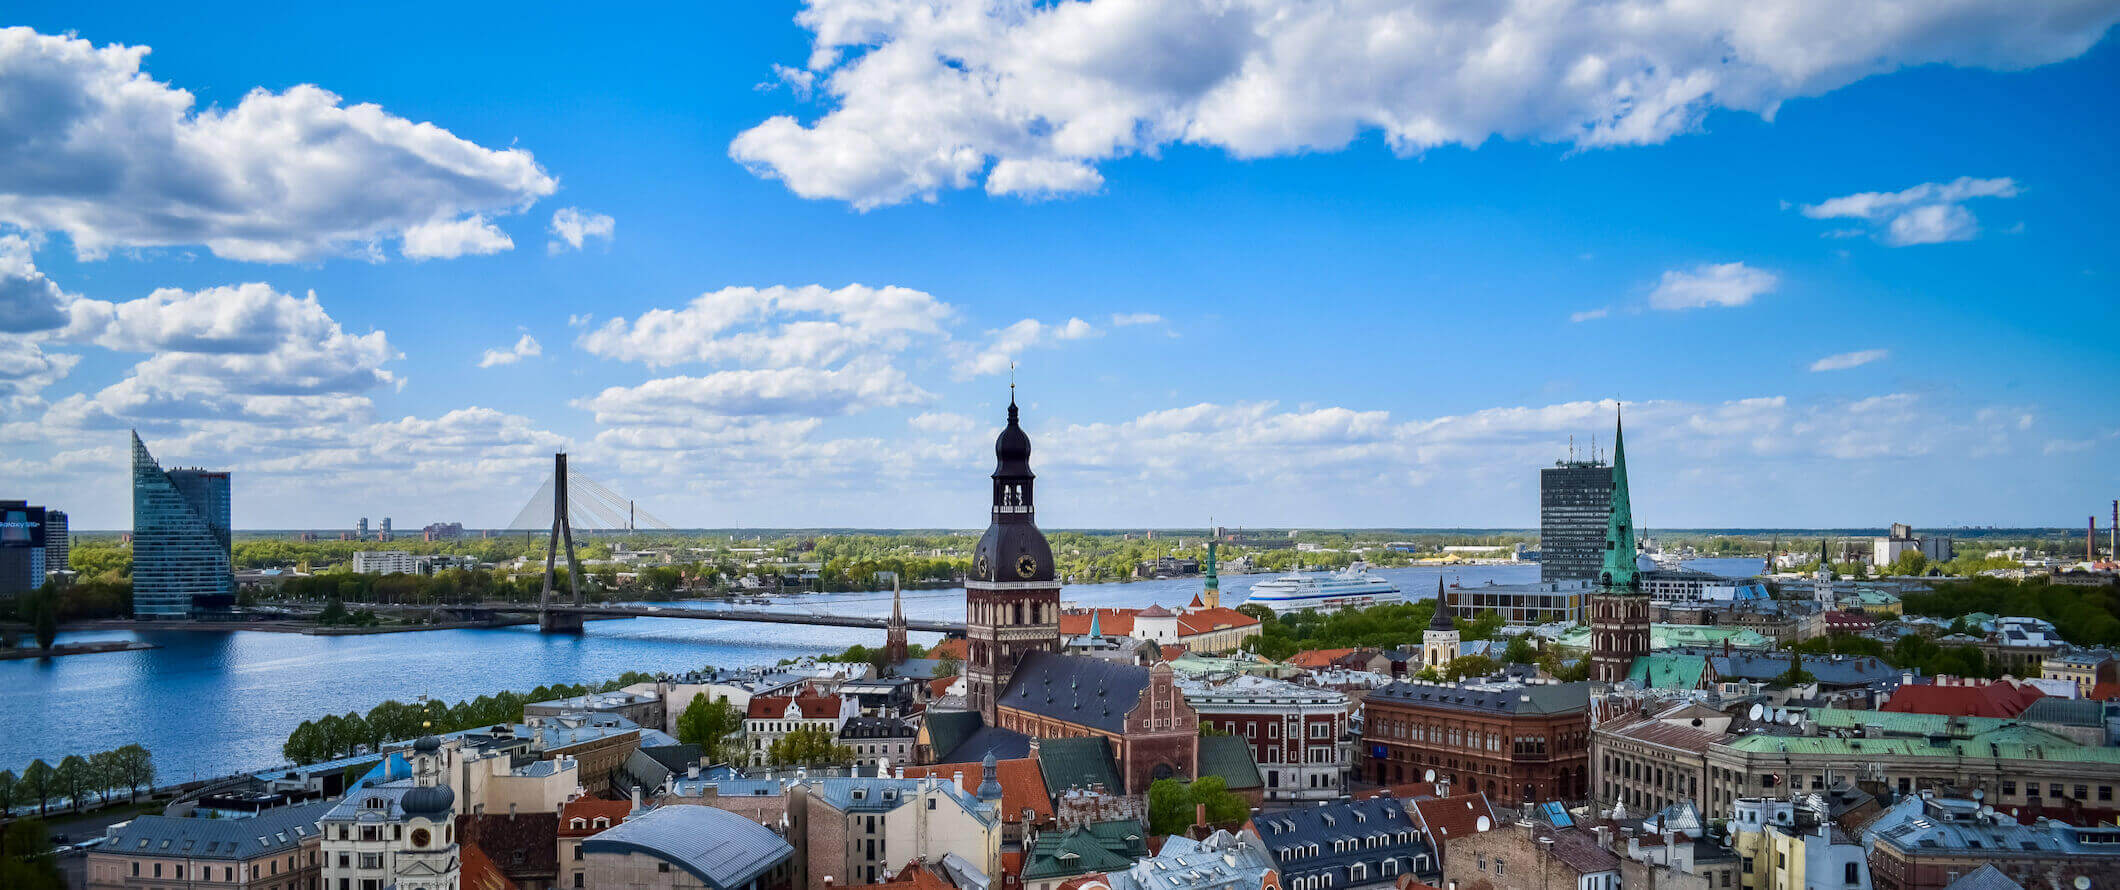 A bright and sunny day over the skyline of Riga, the capital of Latvia